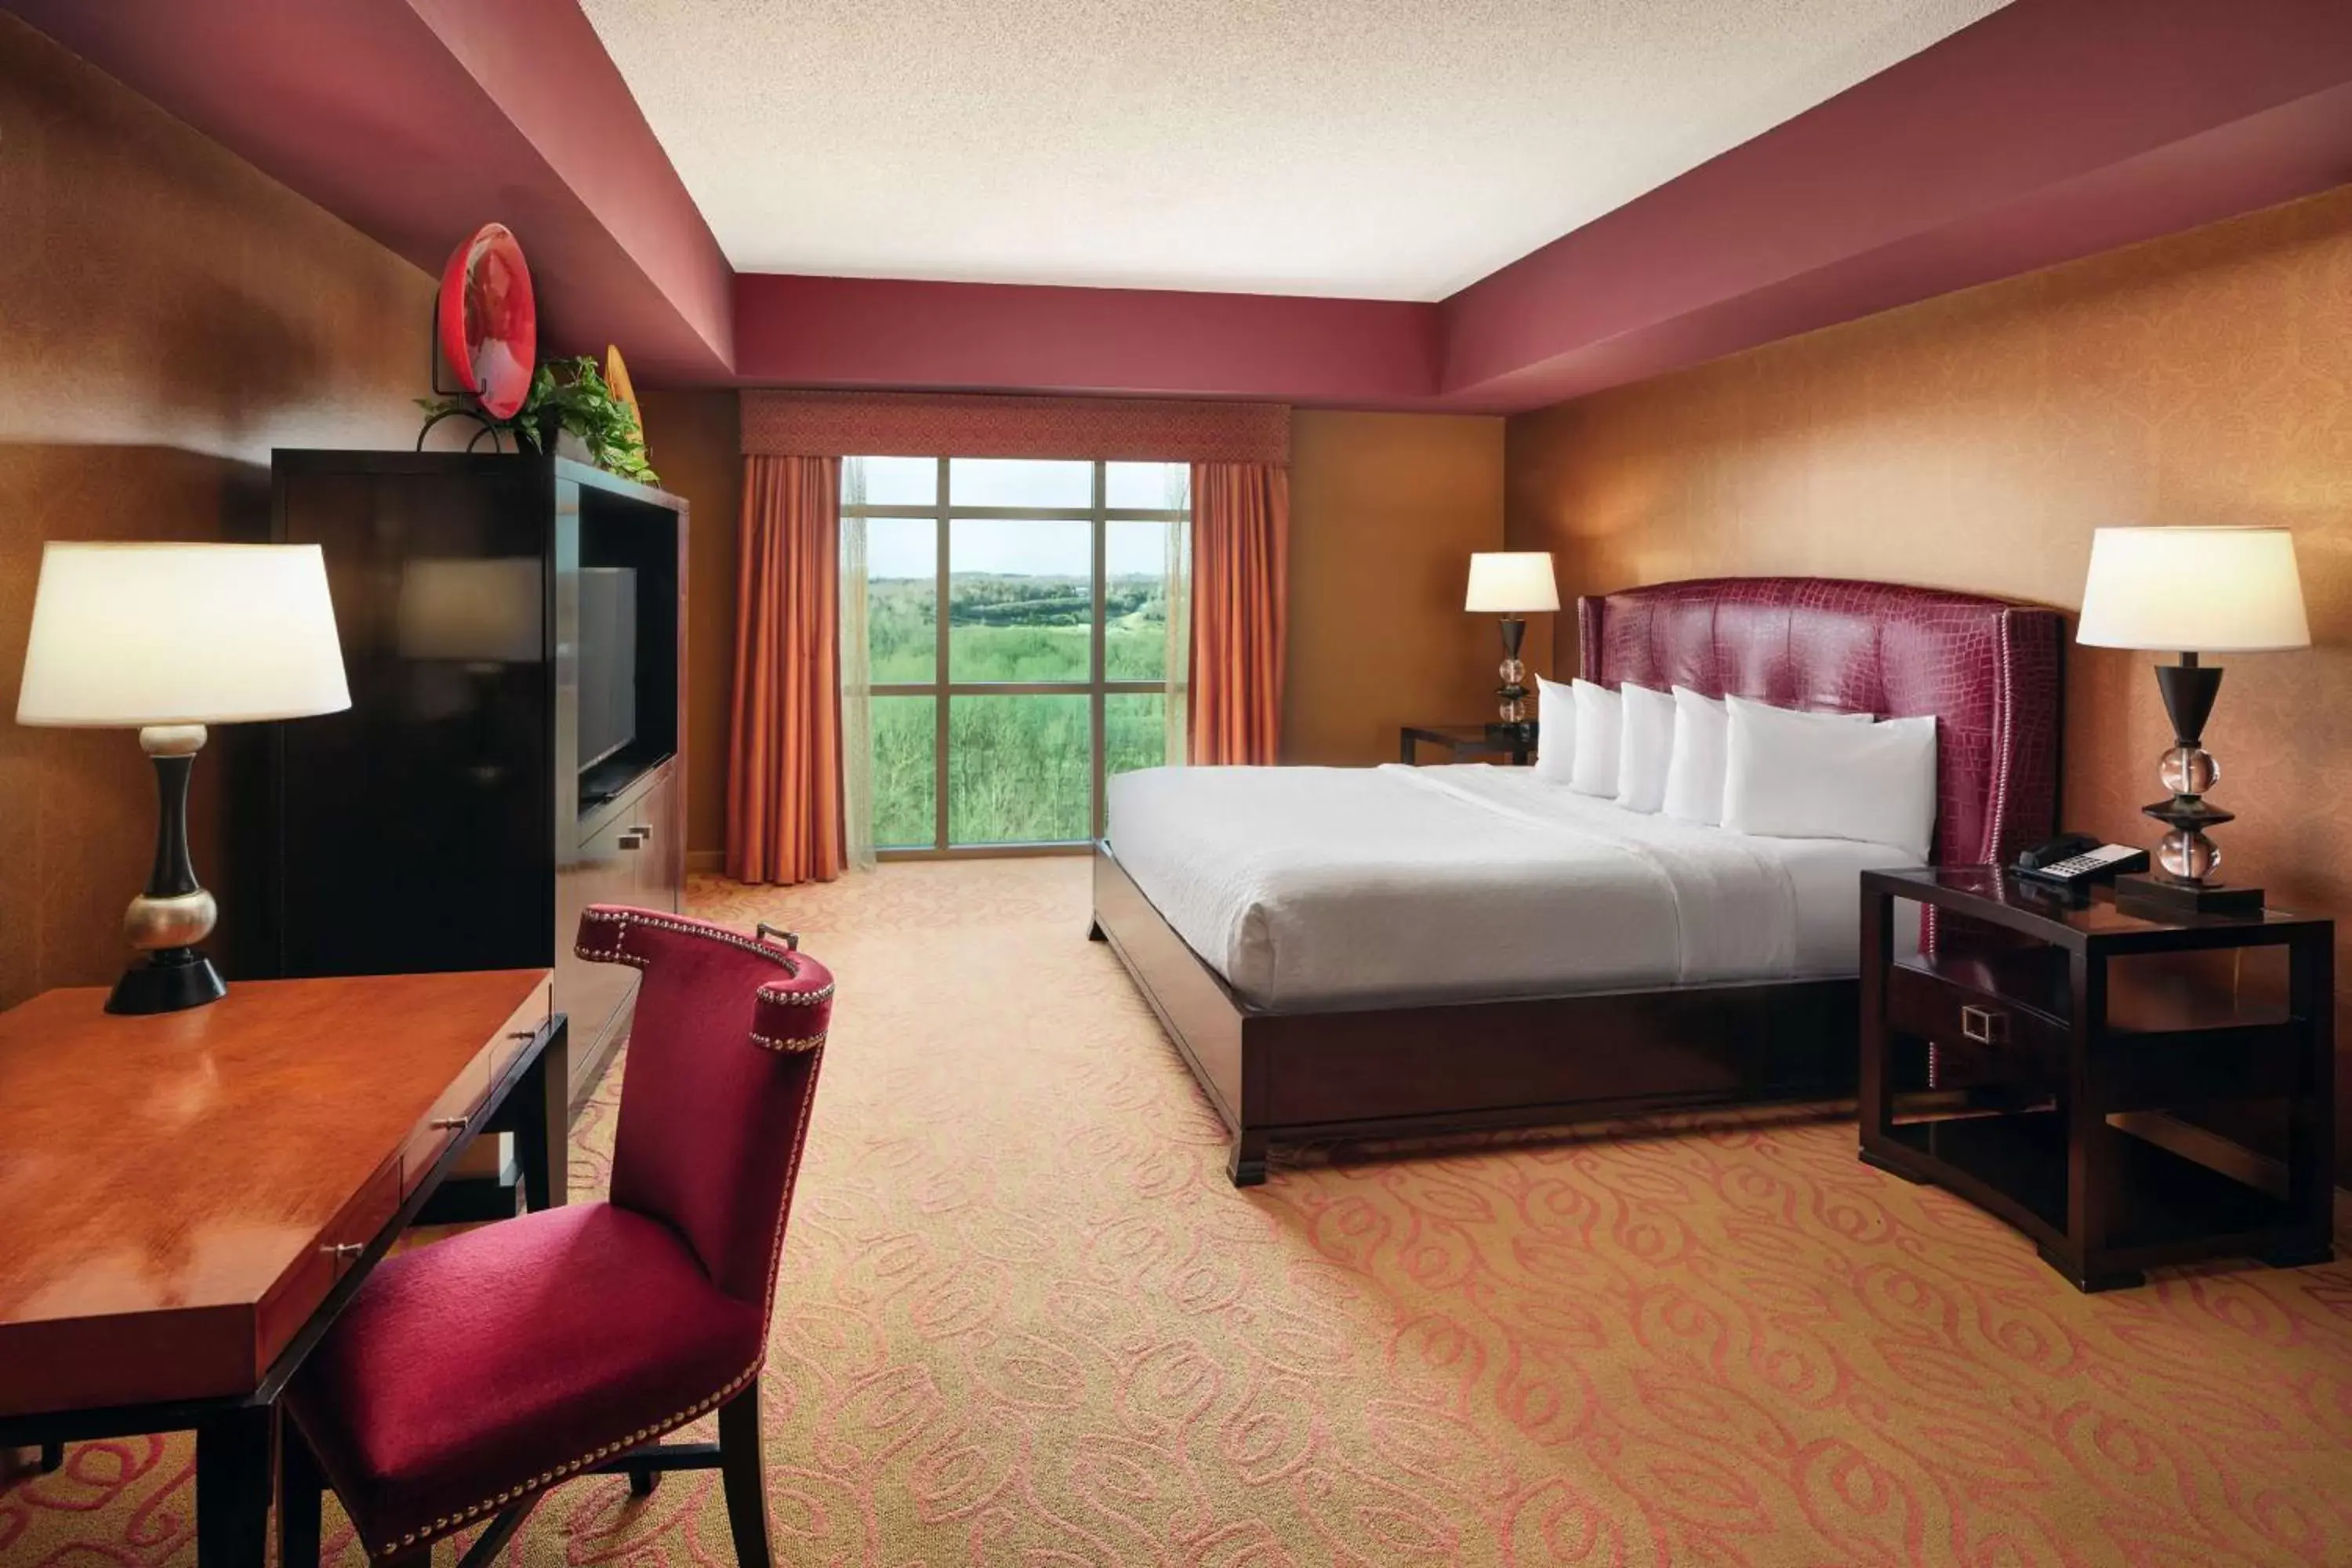 Bedroom in Embassy Suites by Hilton Charlotte Concord Golf Resort & Spa